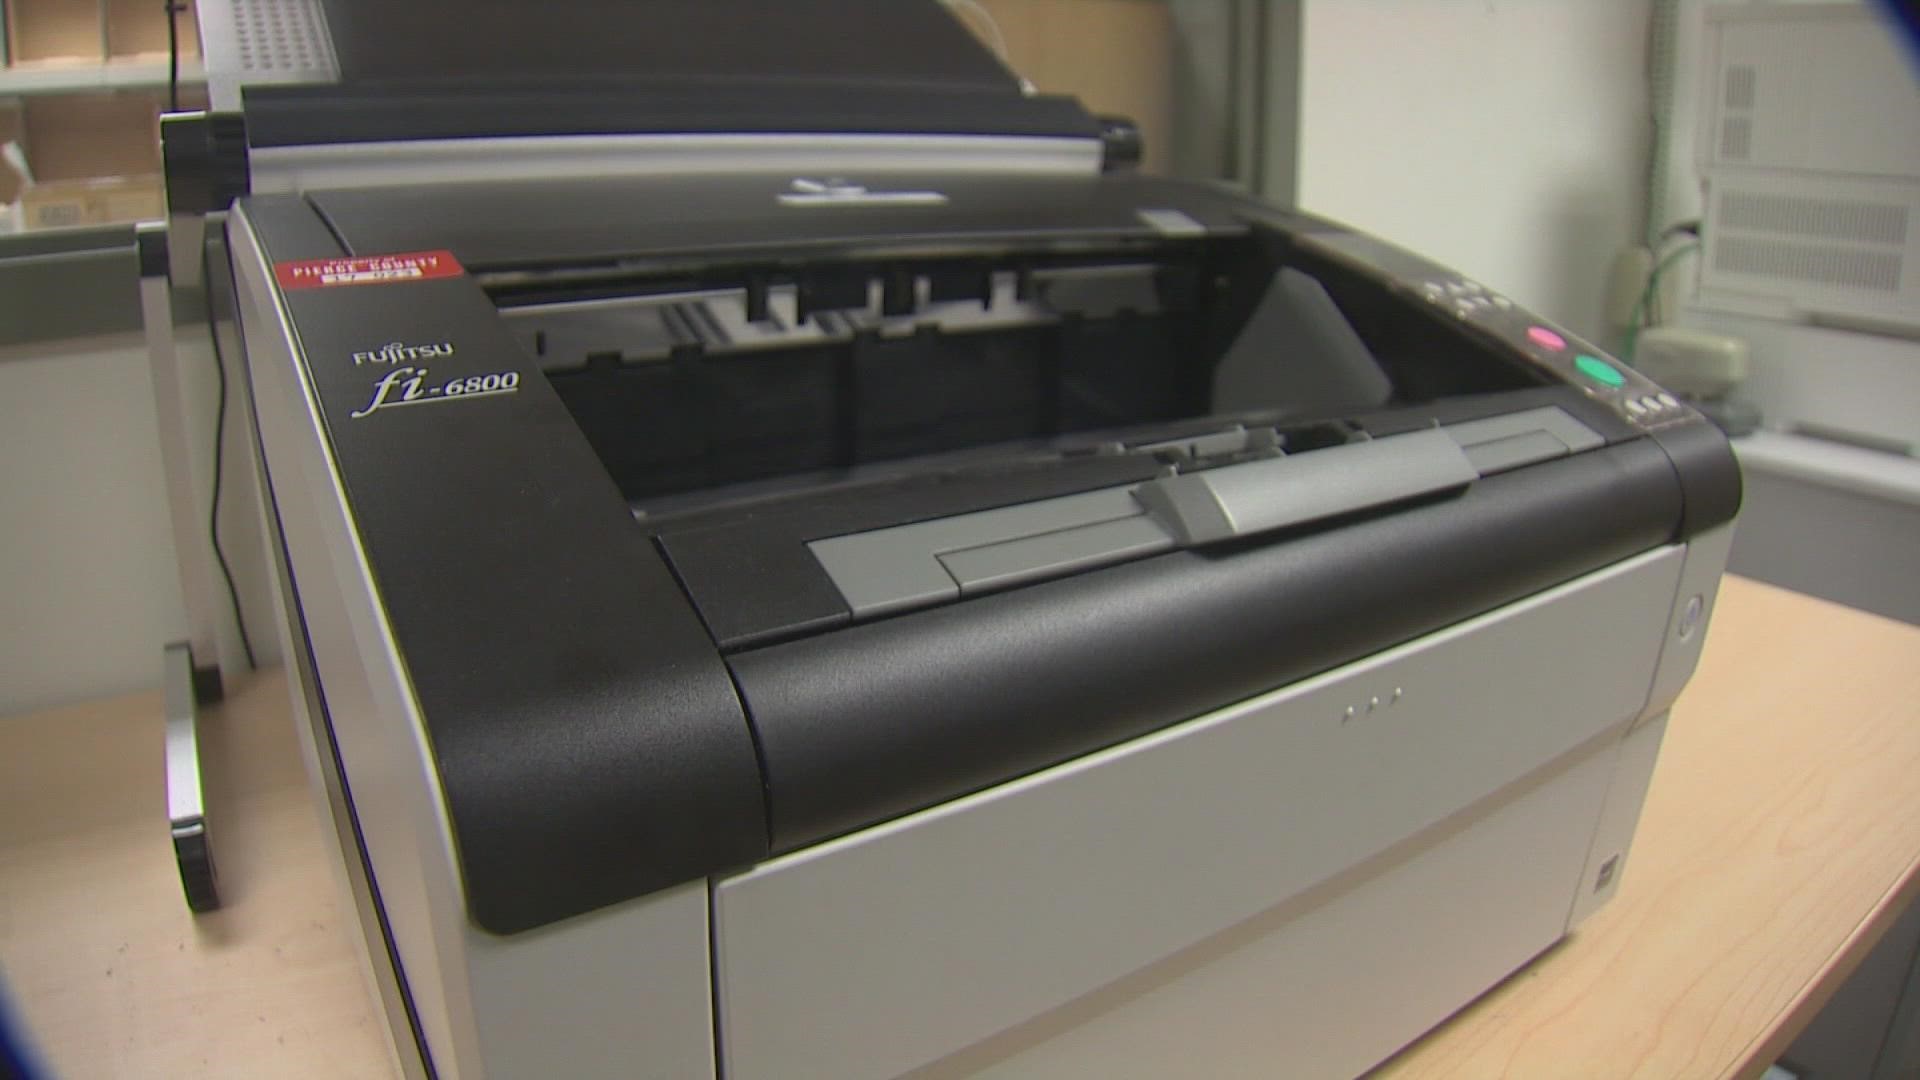 Three weeks away from Election Day, Pierce County elections workers are getting ready to test the machines that will count ballots.